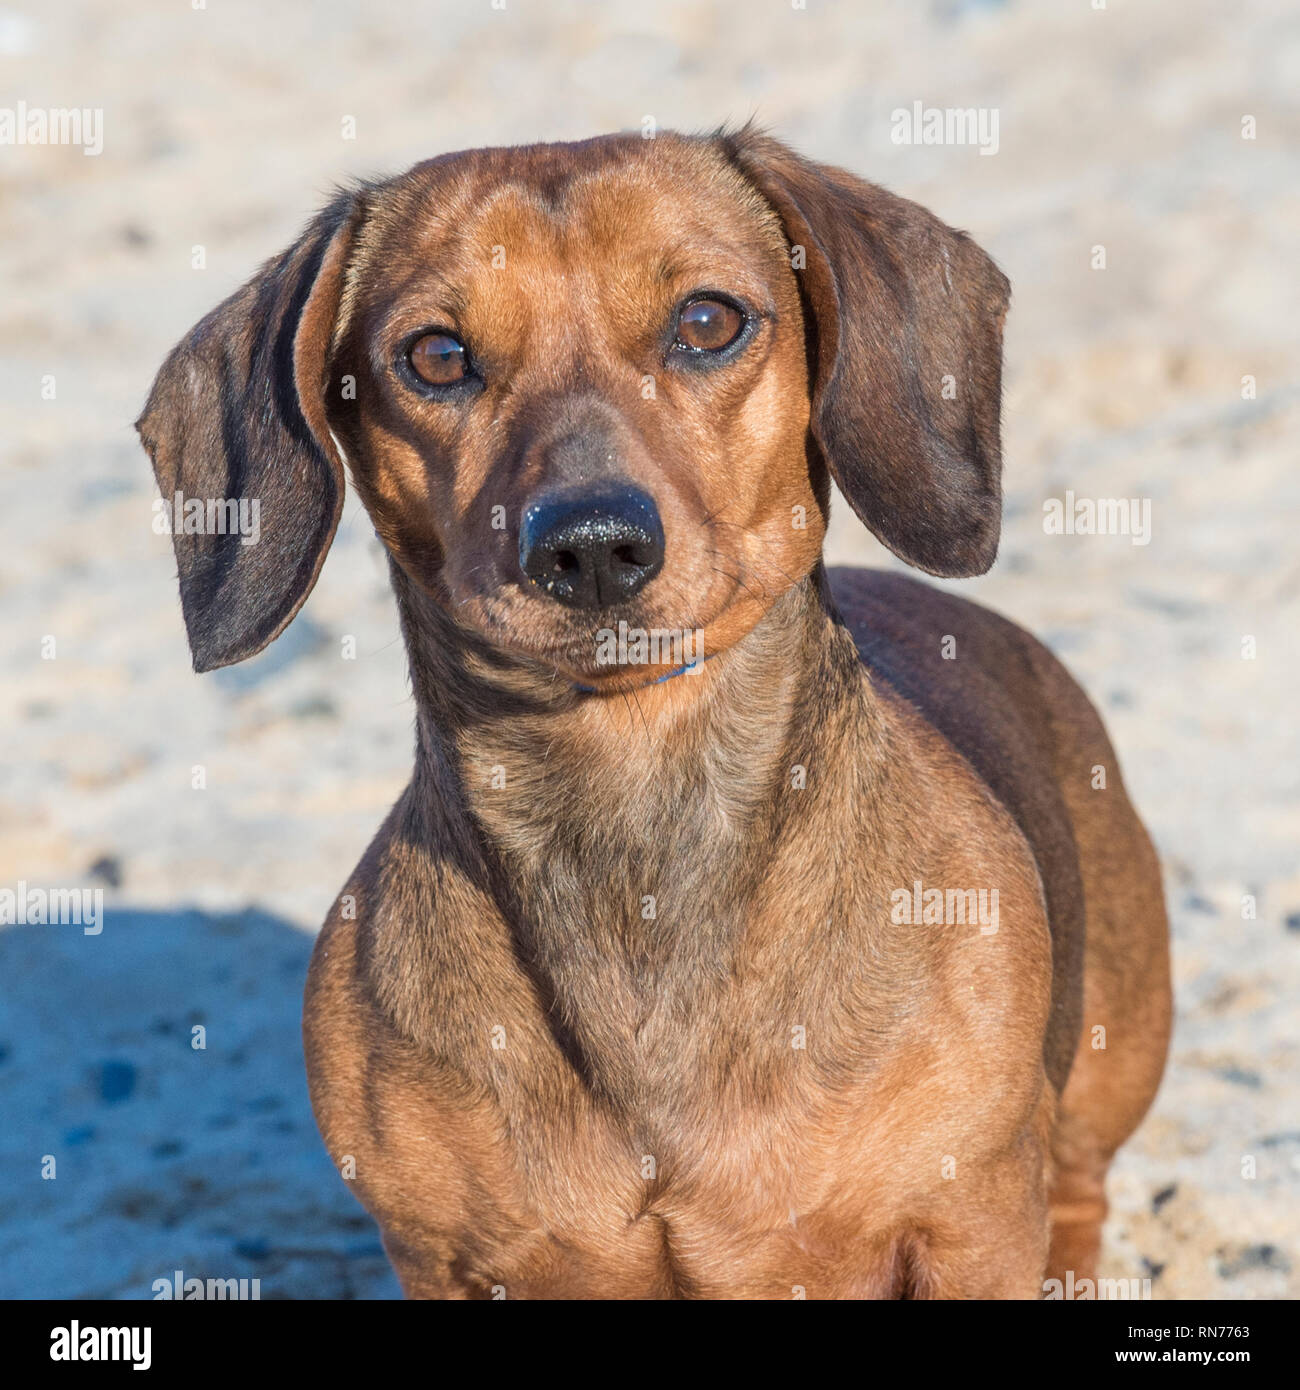 Dachshund dog on beach Banque D'Images